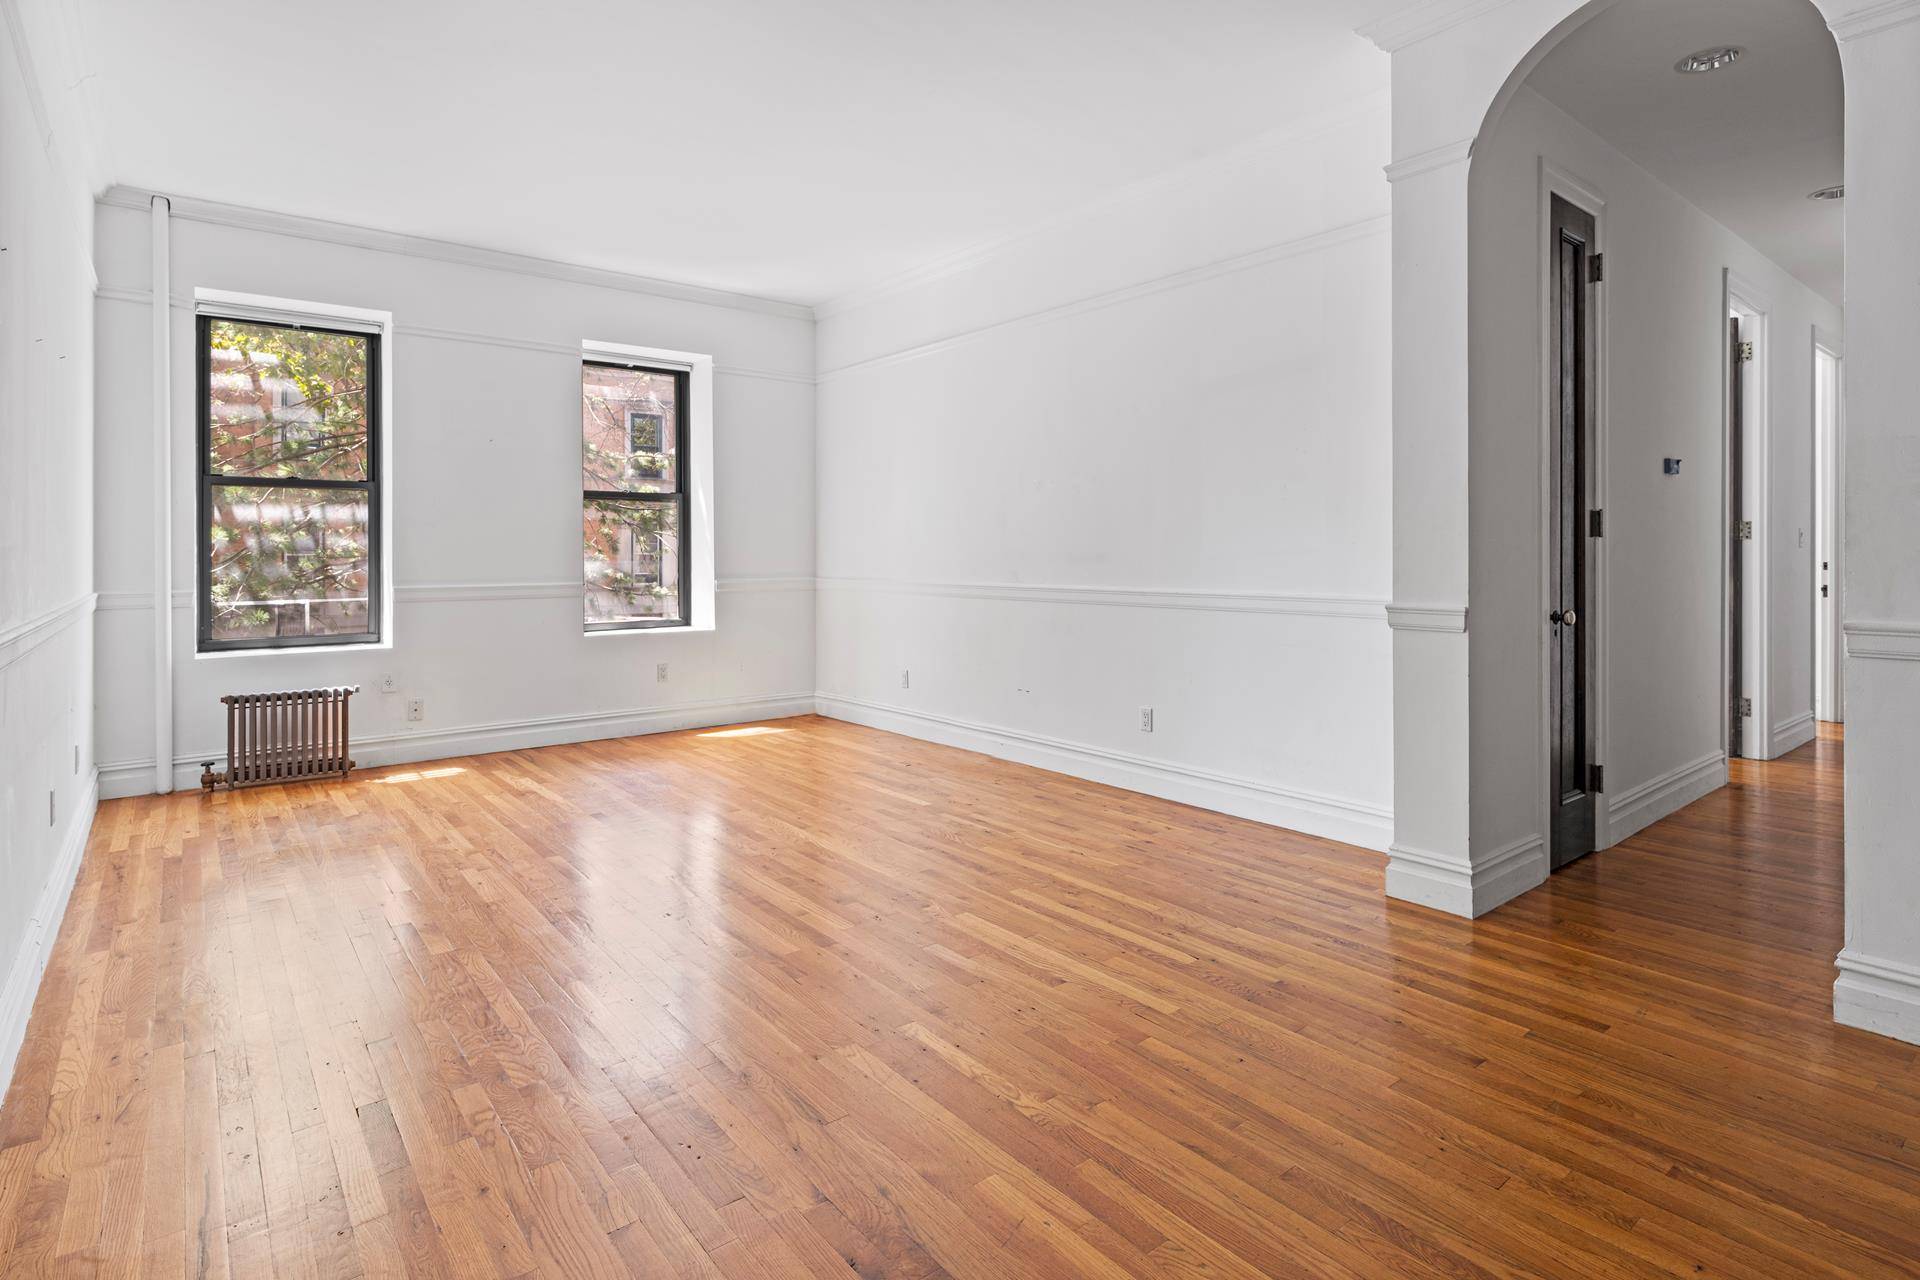 . Presenting 150 Prospect Park West A beautifully restored prewar, elevator building located across from Prospect Park in the heart of Park Slope.